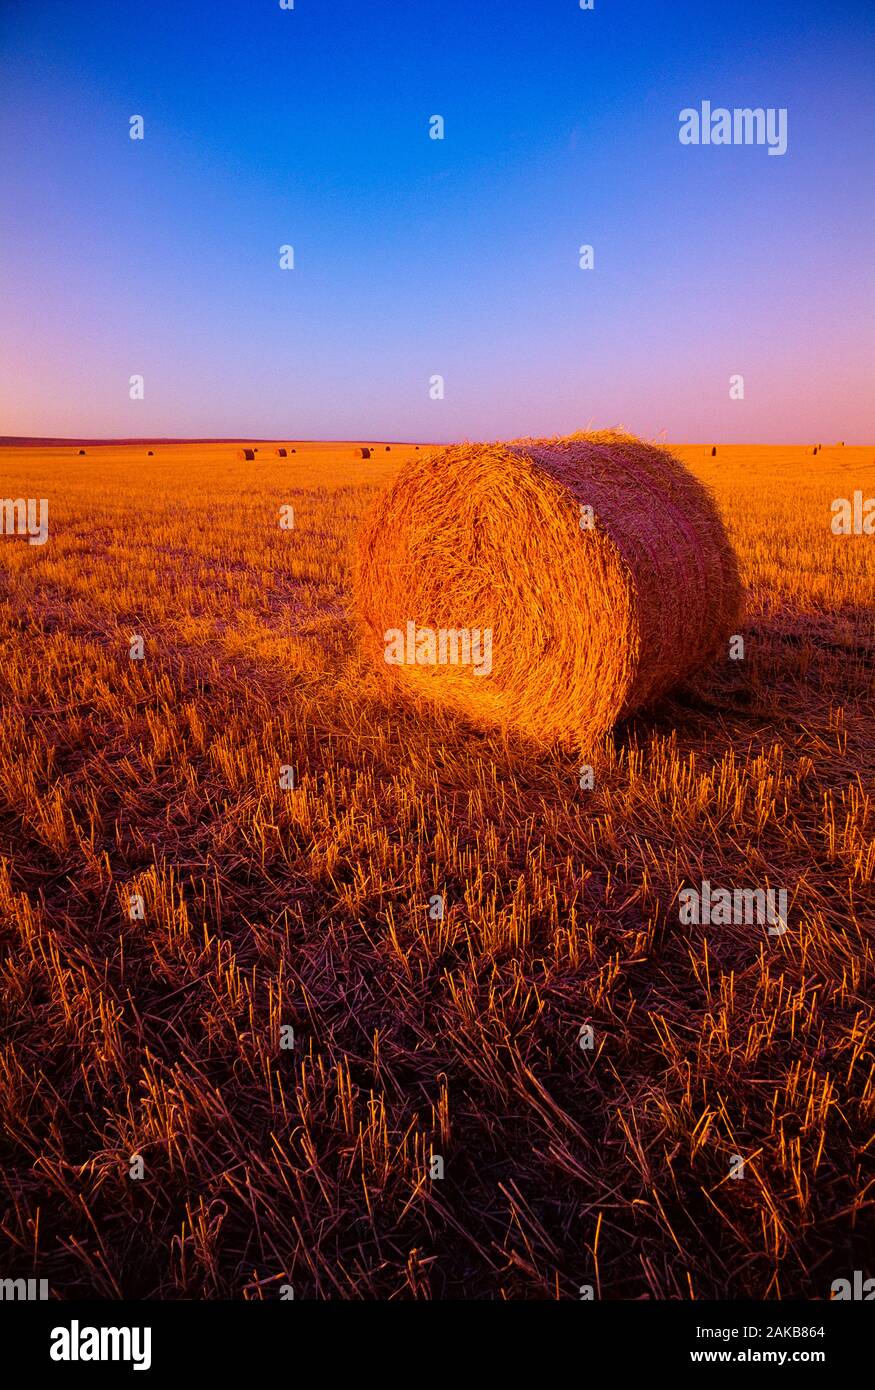 Countryside landscape with hay bale in field, Drumheller, Alberta, Canada Stock Photo